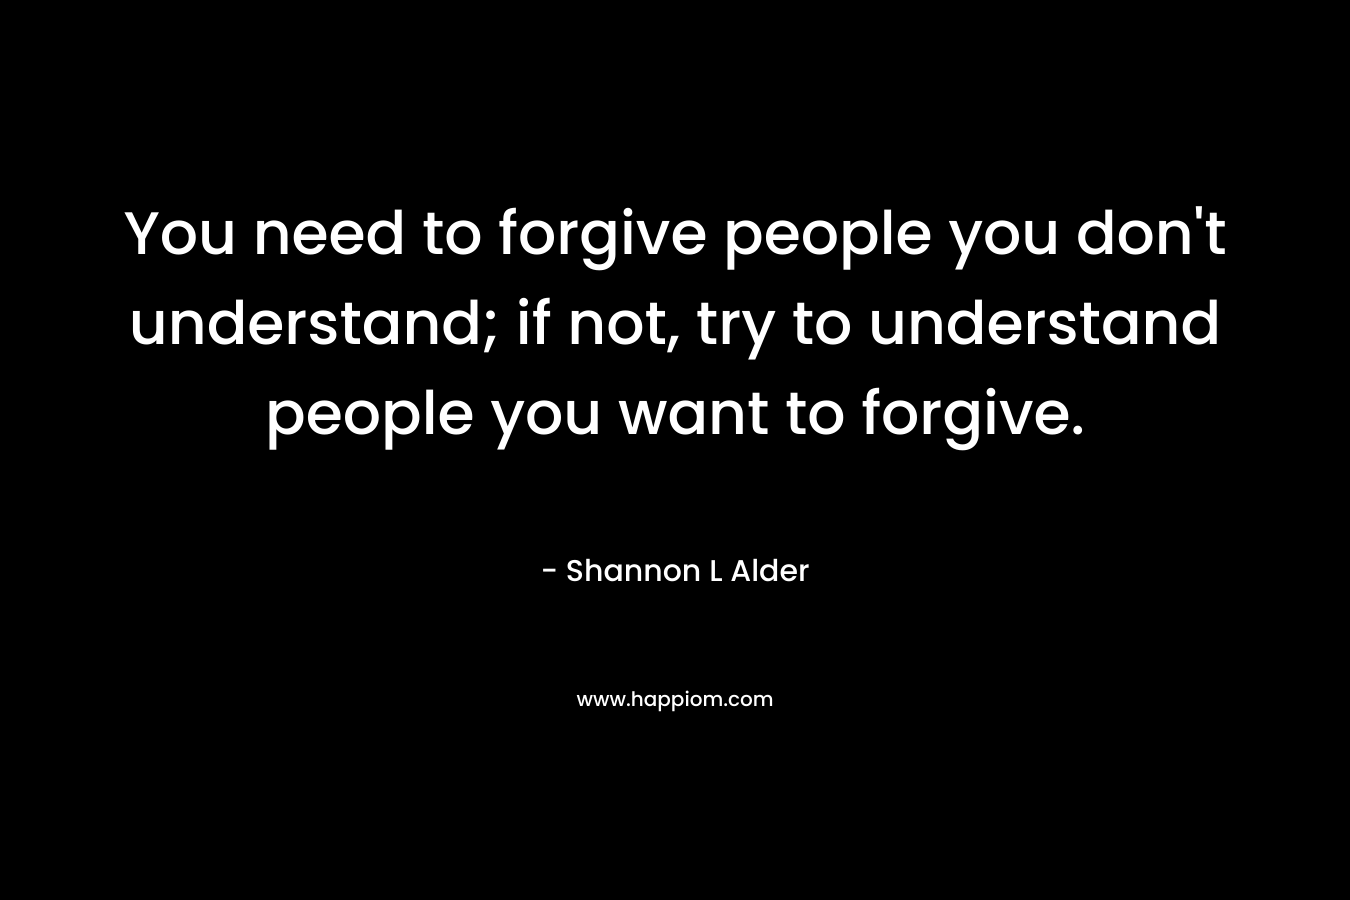 You need to forgive people you don't understand; if not, try to understand people you want to forgive.